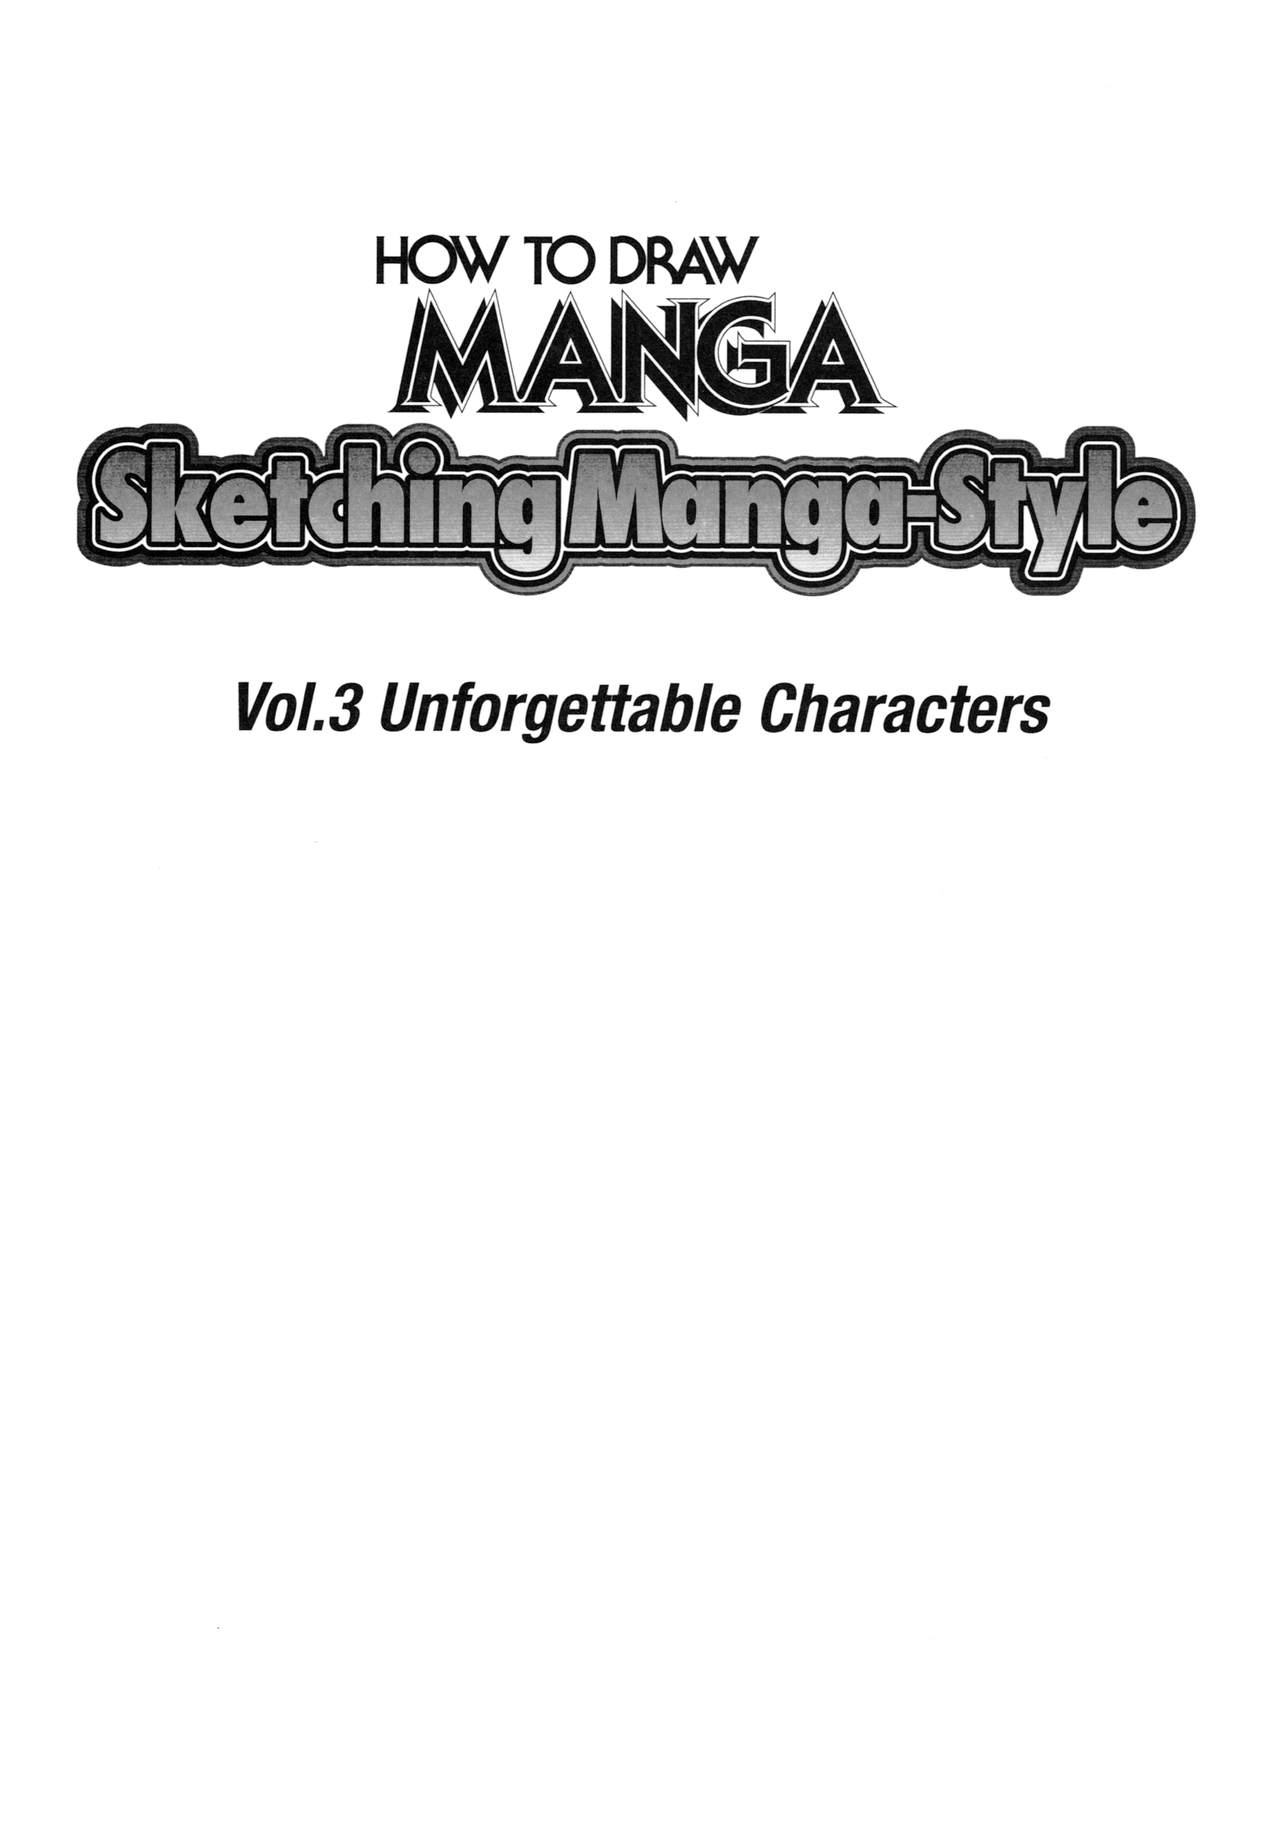 Sketching Manga-Style Vol. 3 - Unforgettable Characters 0